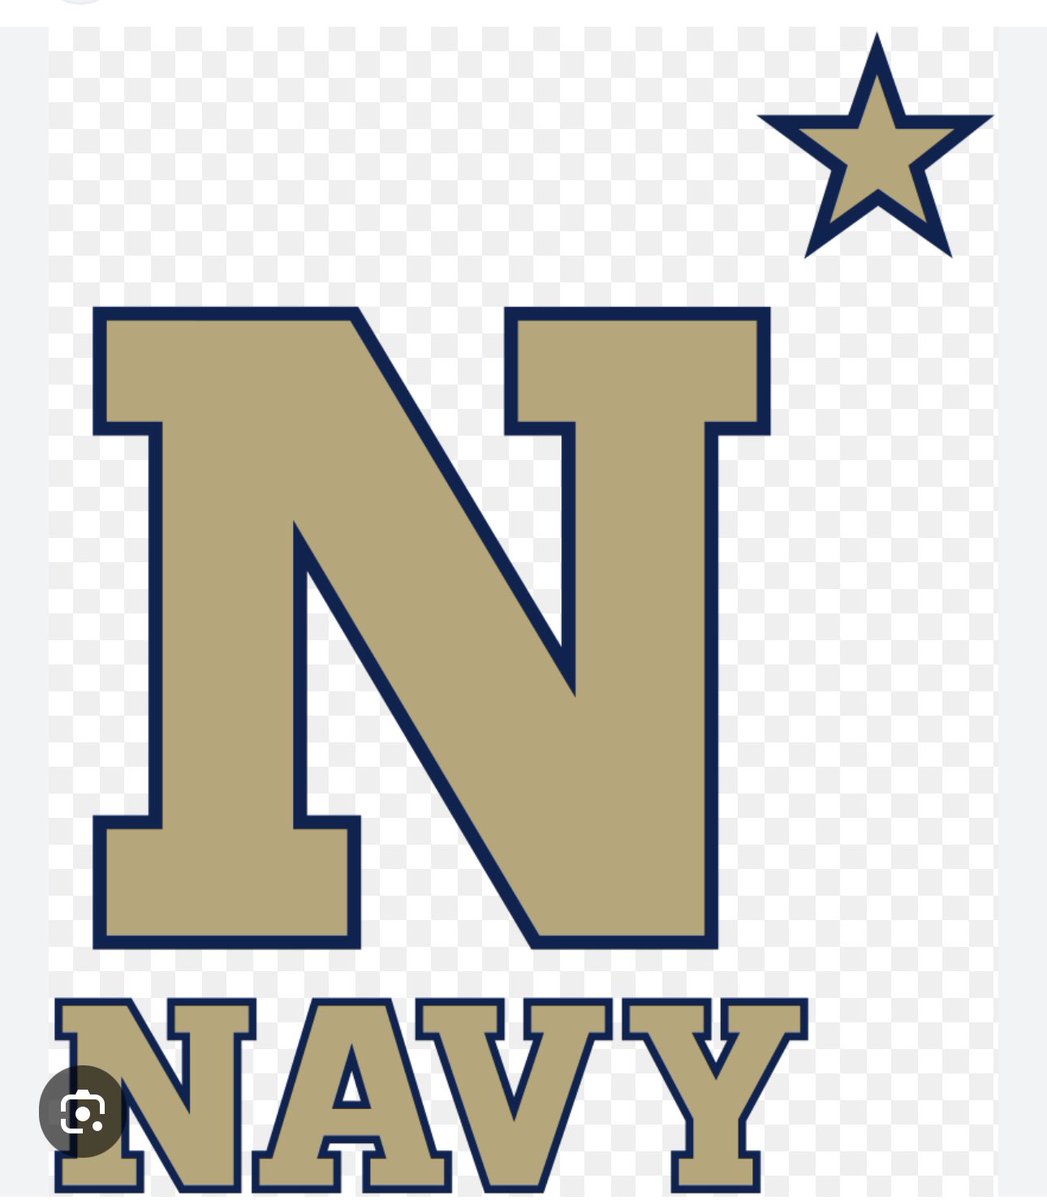 Thanks @NavyCoachYo for coming by today